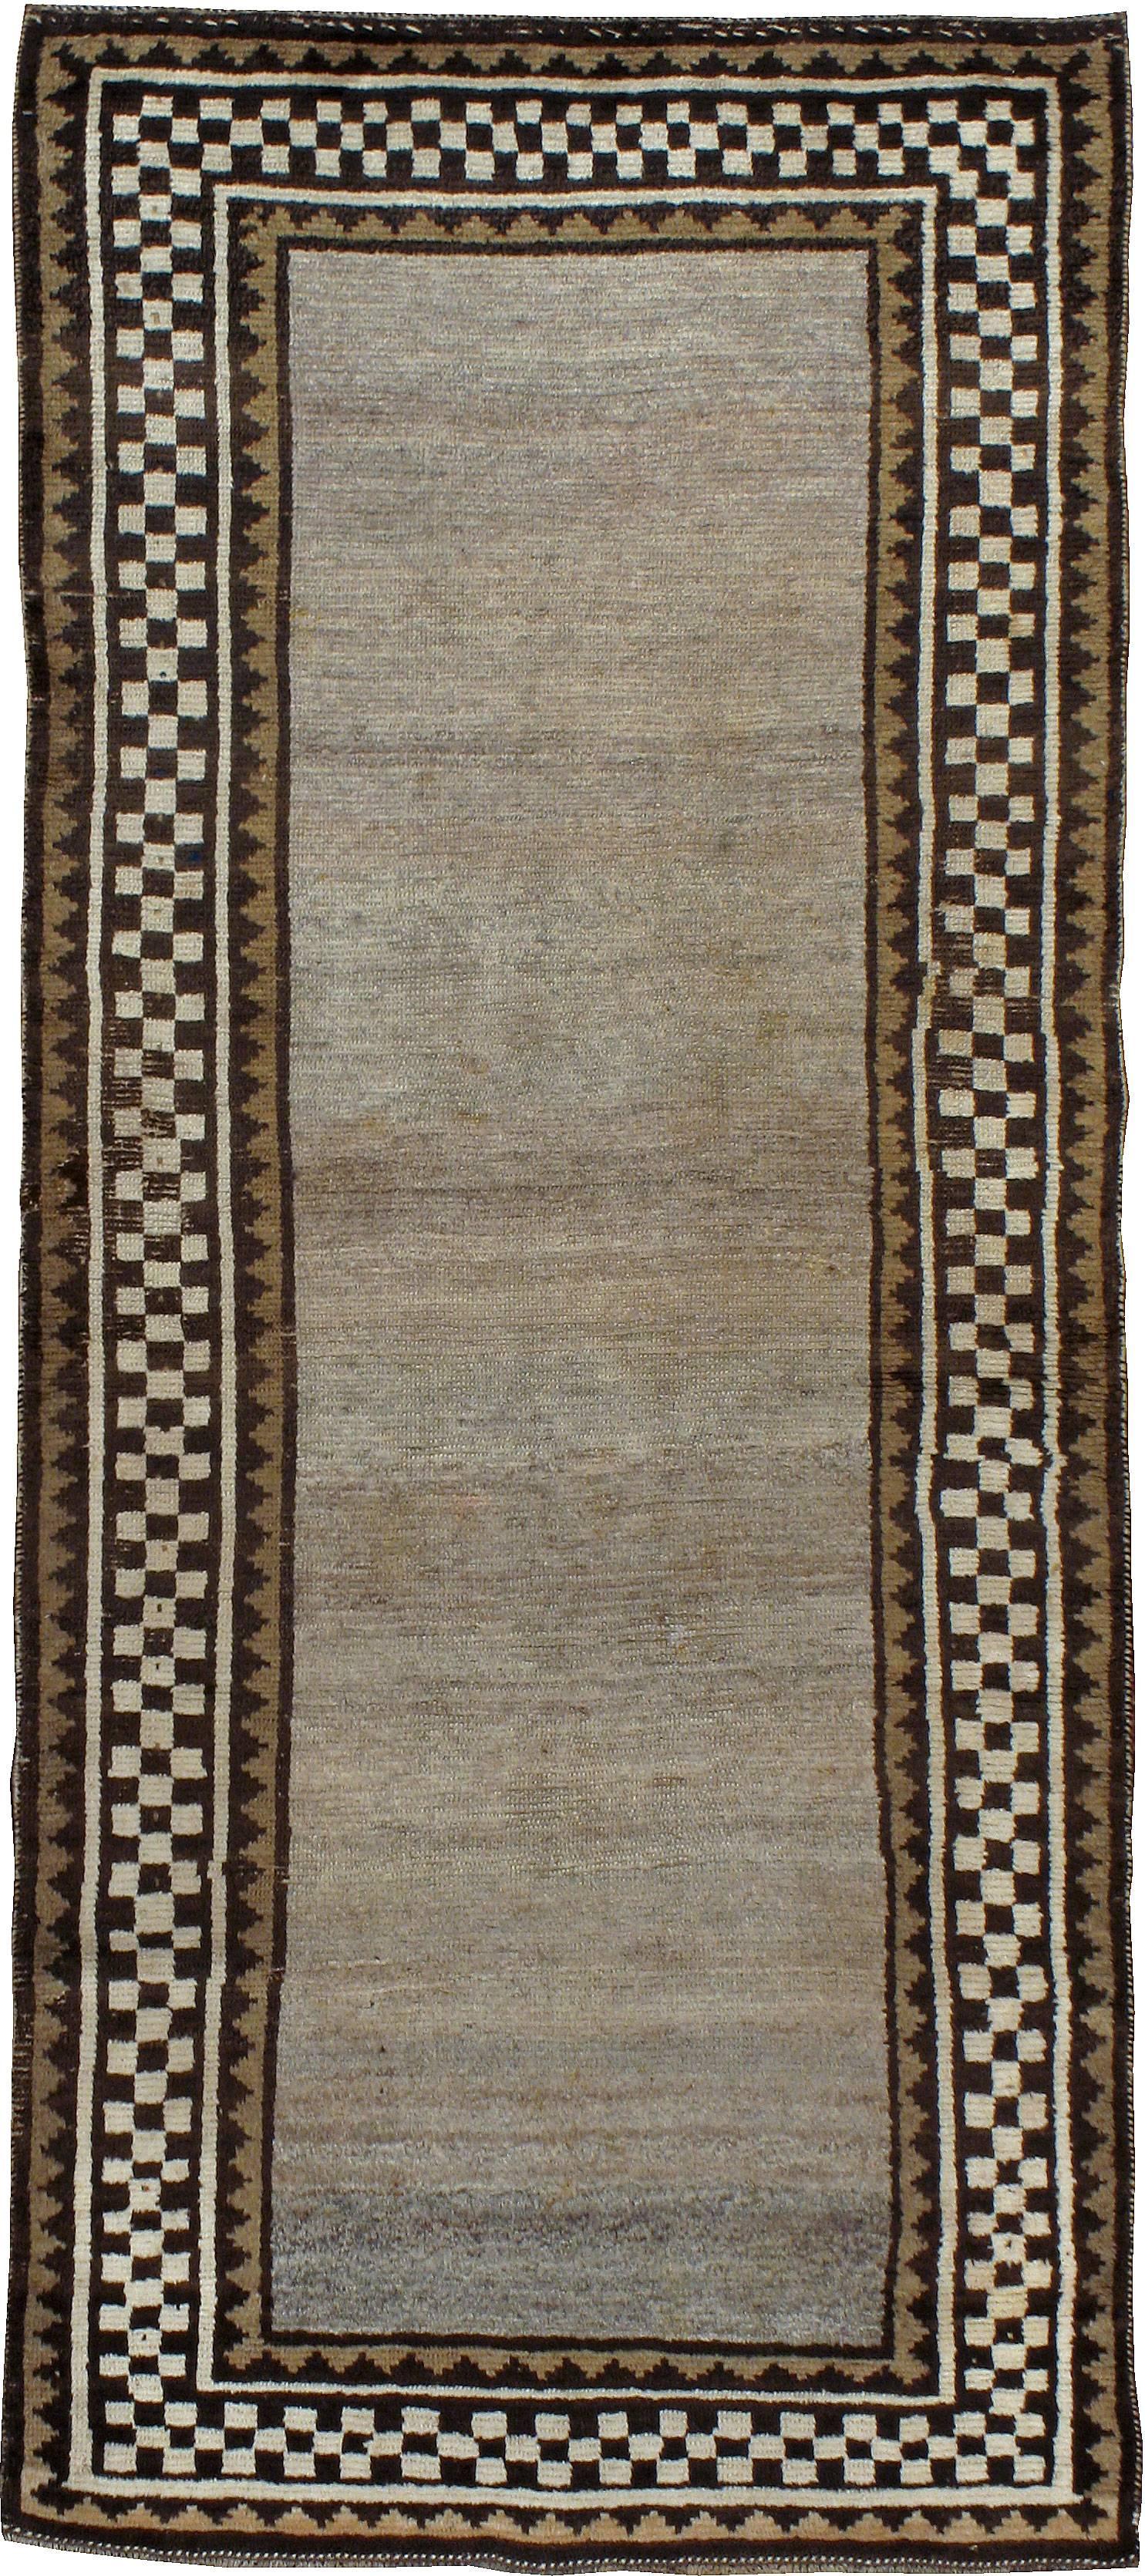 An antique tribal Persian Gabbeh carpet from the second quarter of the 20th century with an unpretentious-folksy appeal.